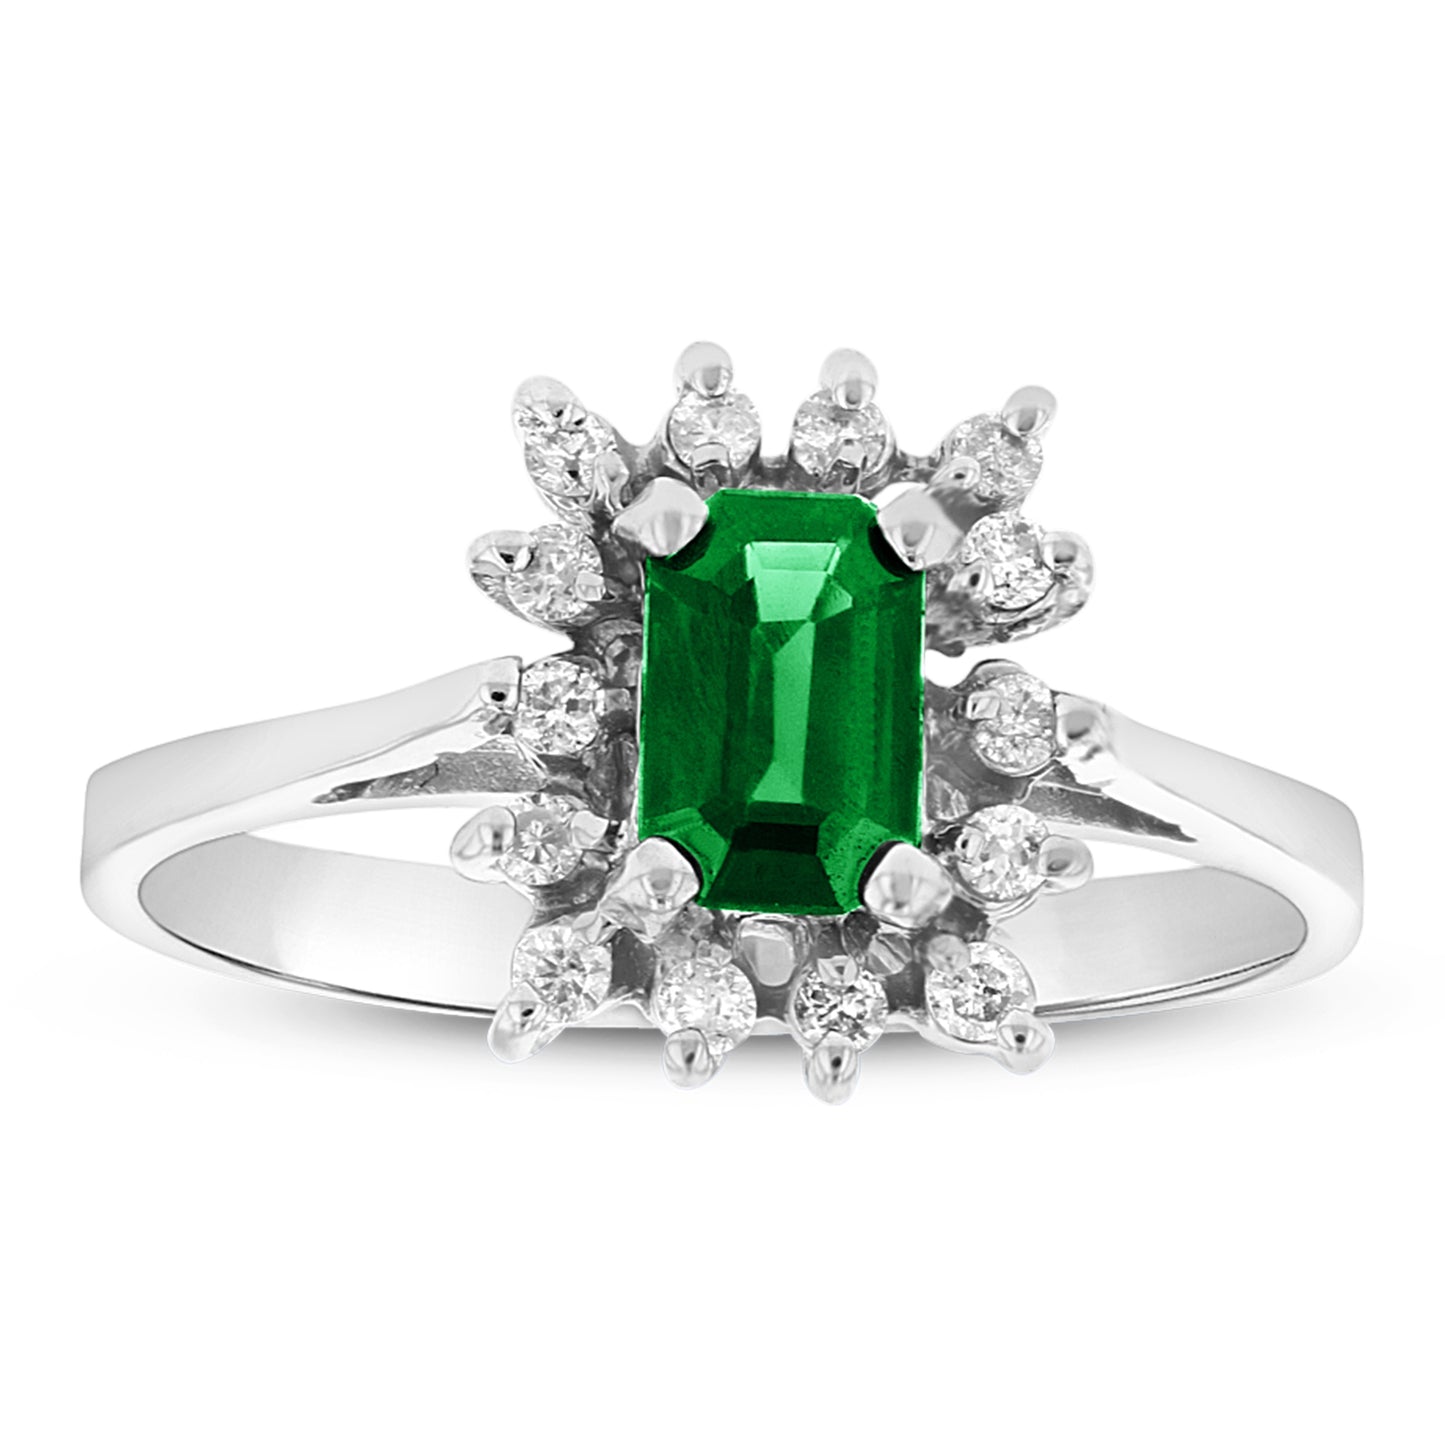 1/7ct Emerald & Diamond Engagement Ring in 14k White Gold